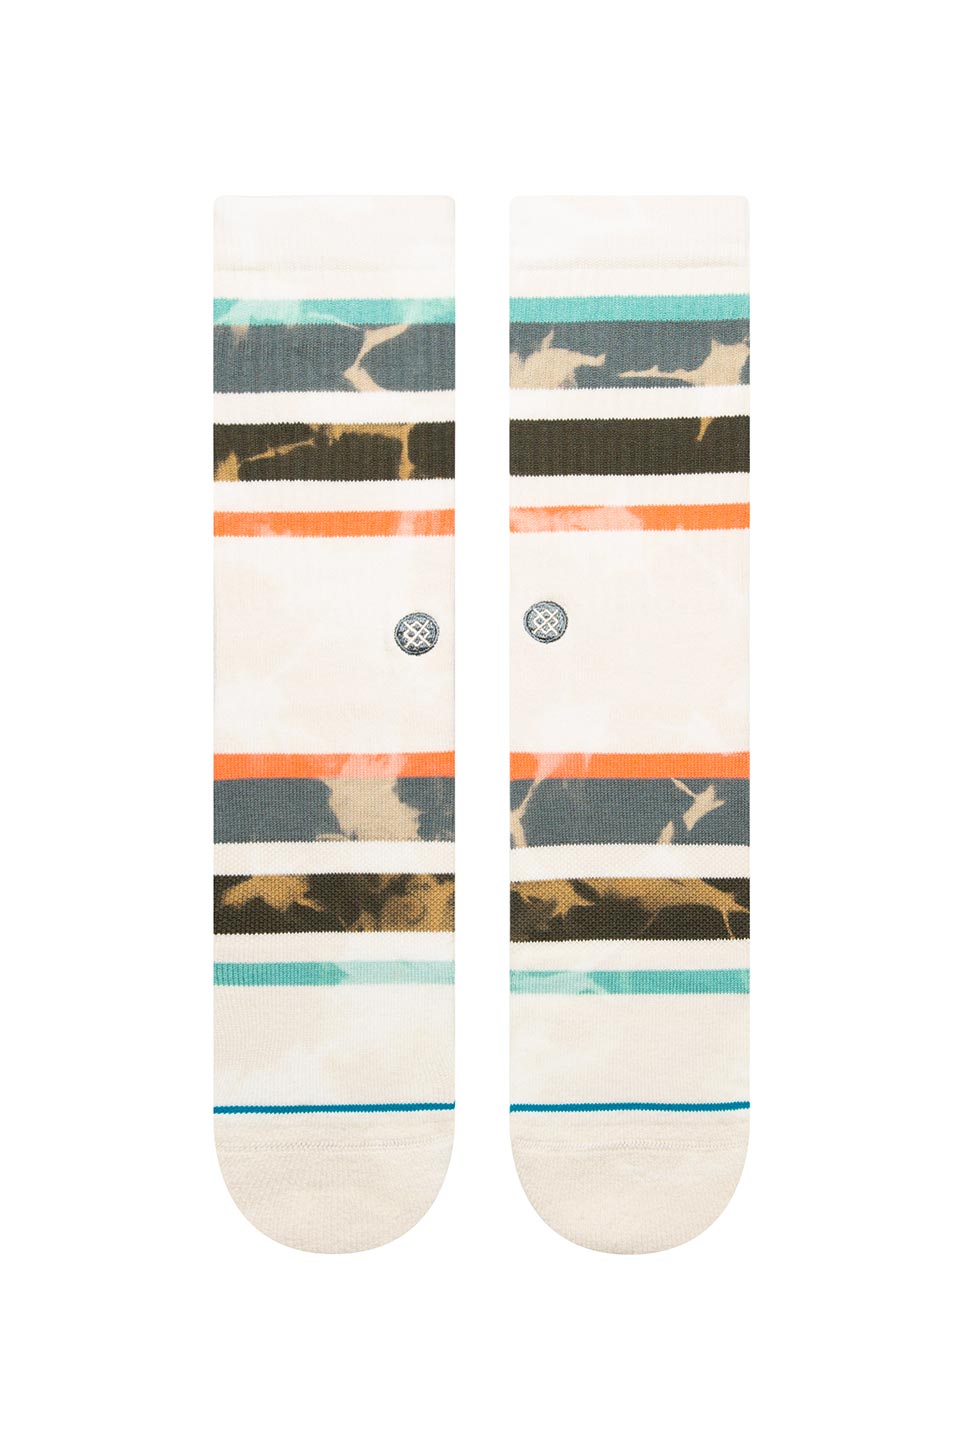 Stance - Brong - Vintage White - Front